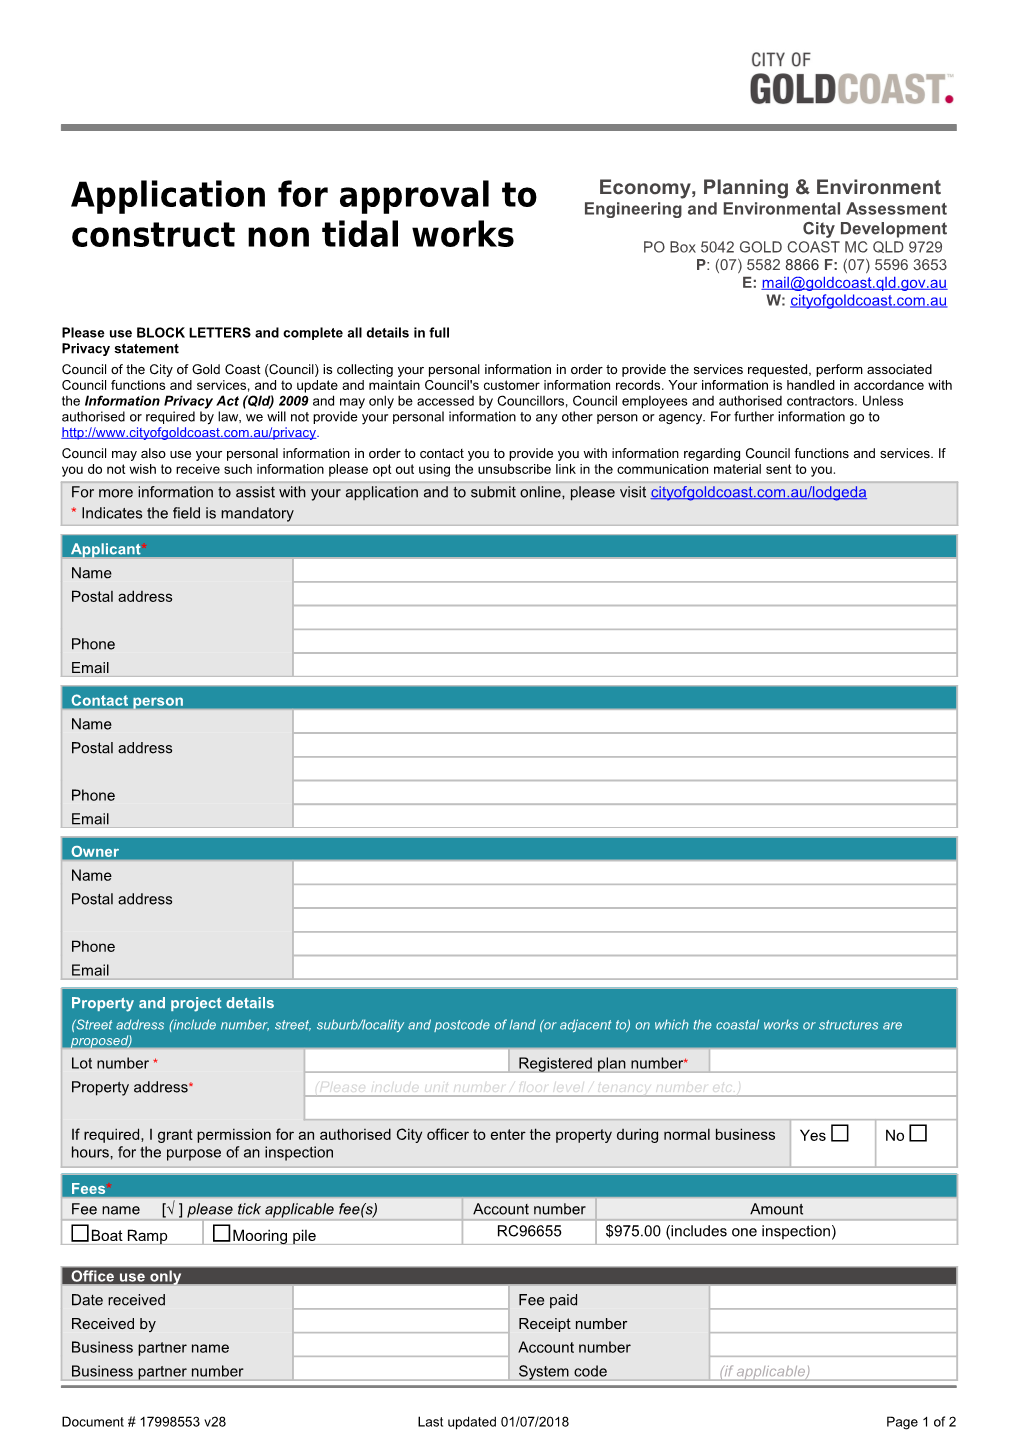 Application for Approval to Construct Non Tidal Coastal Works